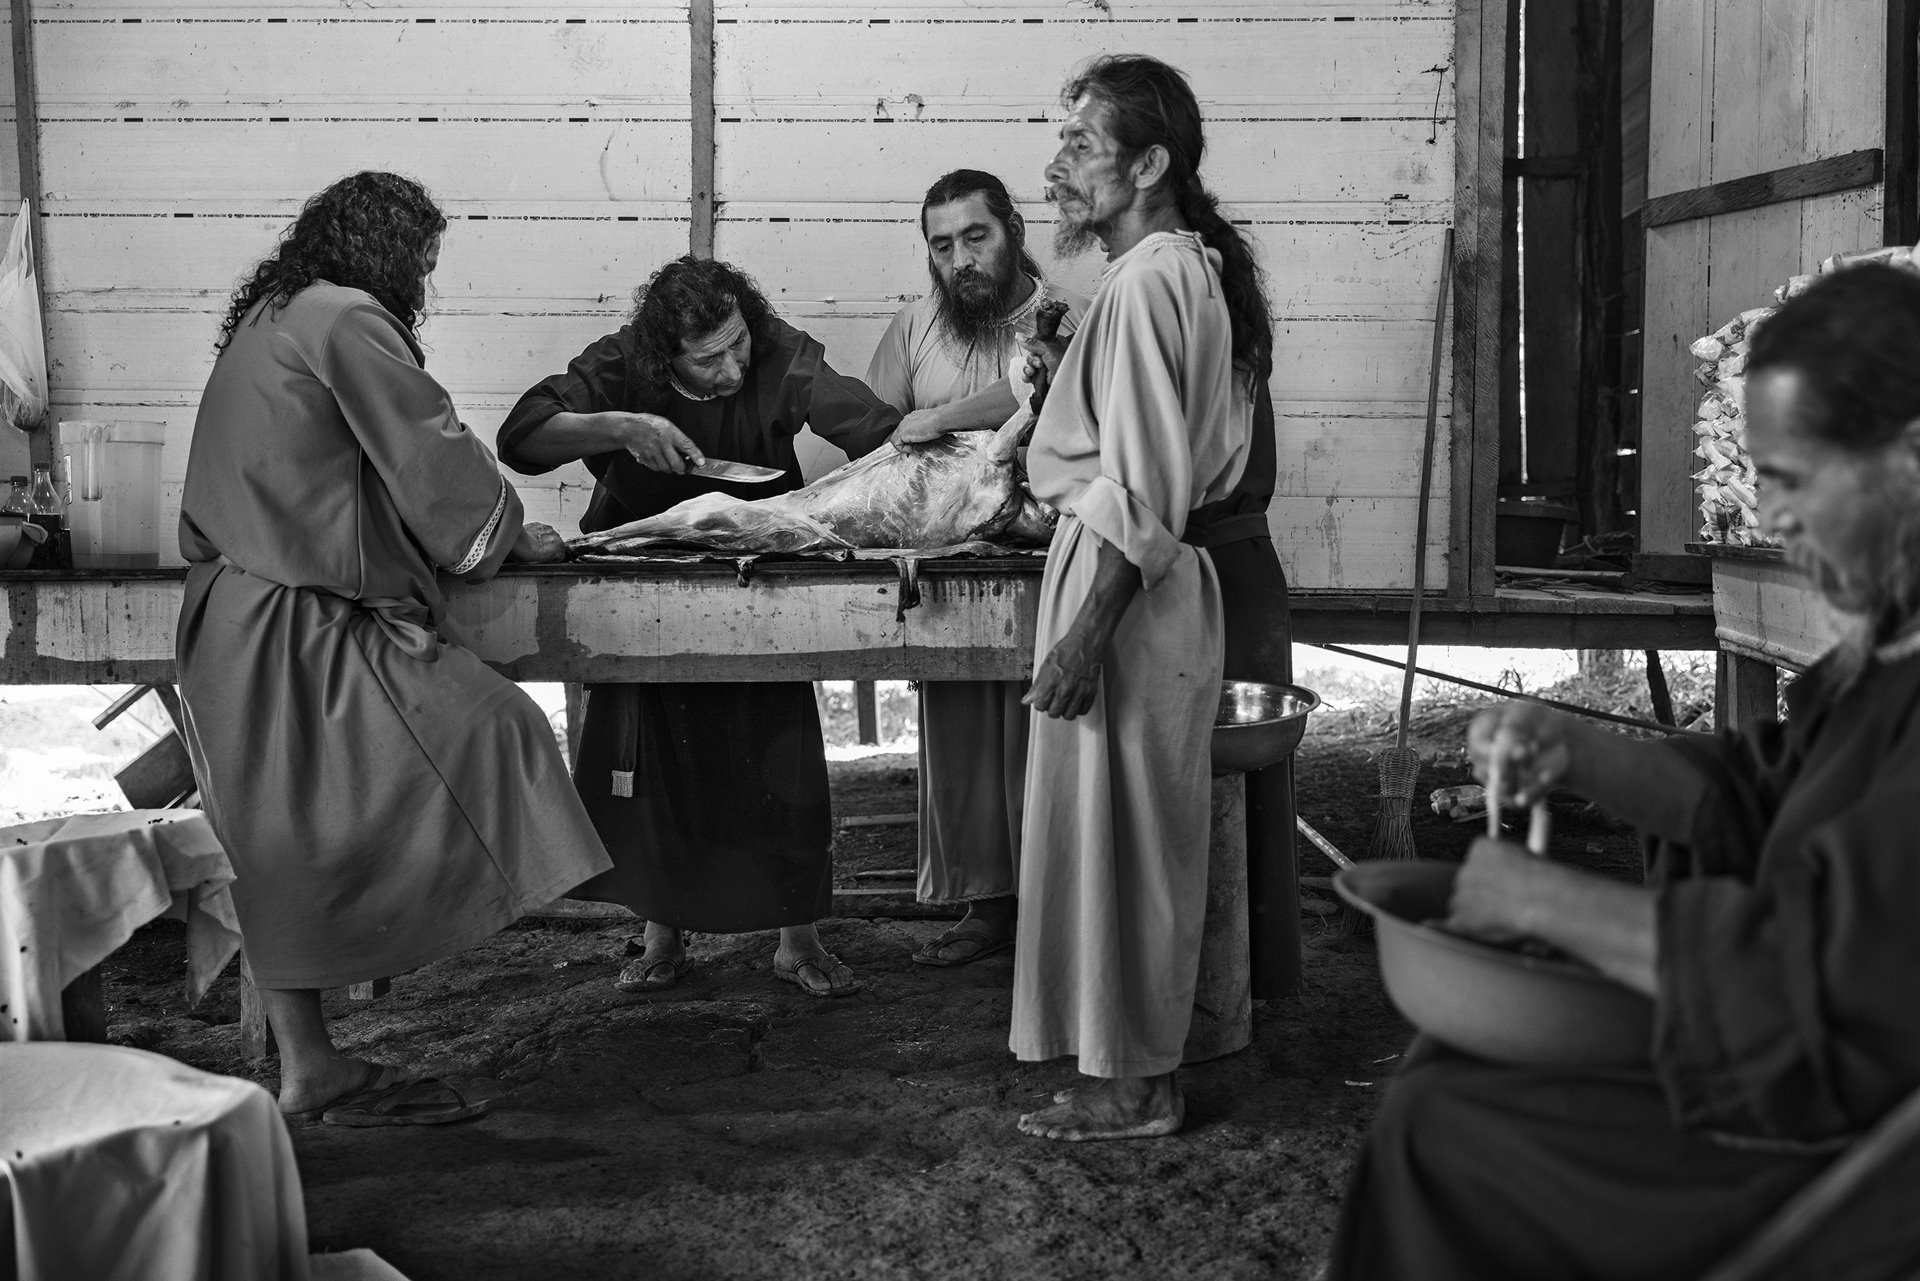 Members of the church Universal New Covenant Israelite Mission prepare a lamb for a ritual, during a retreat in rural Benjamin Constant, a Brazilian municipality located on the border with Peru. The sect, which emerged in Peru, has found an increasing membership in the region, and is already active in other Brazilian states. The growth of such sects and of evangelism in the region has had a strong impact on the way of life and culture of the traditional populations. Indigenous people&rsquo;s organizations raised concerns that these attempts to proselytize in their communities violated their constitutional right to maintain their cultural heritage and sacred practices, and threatened their safety.